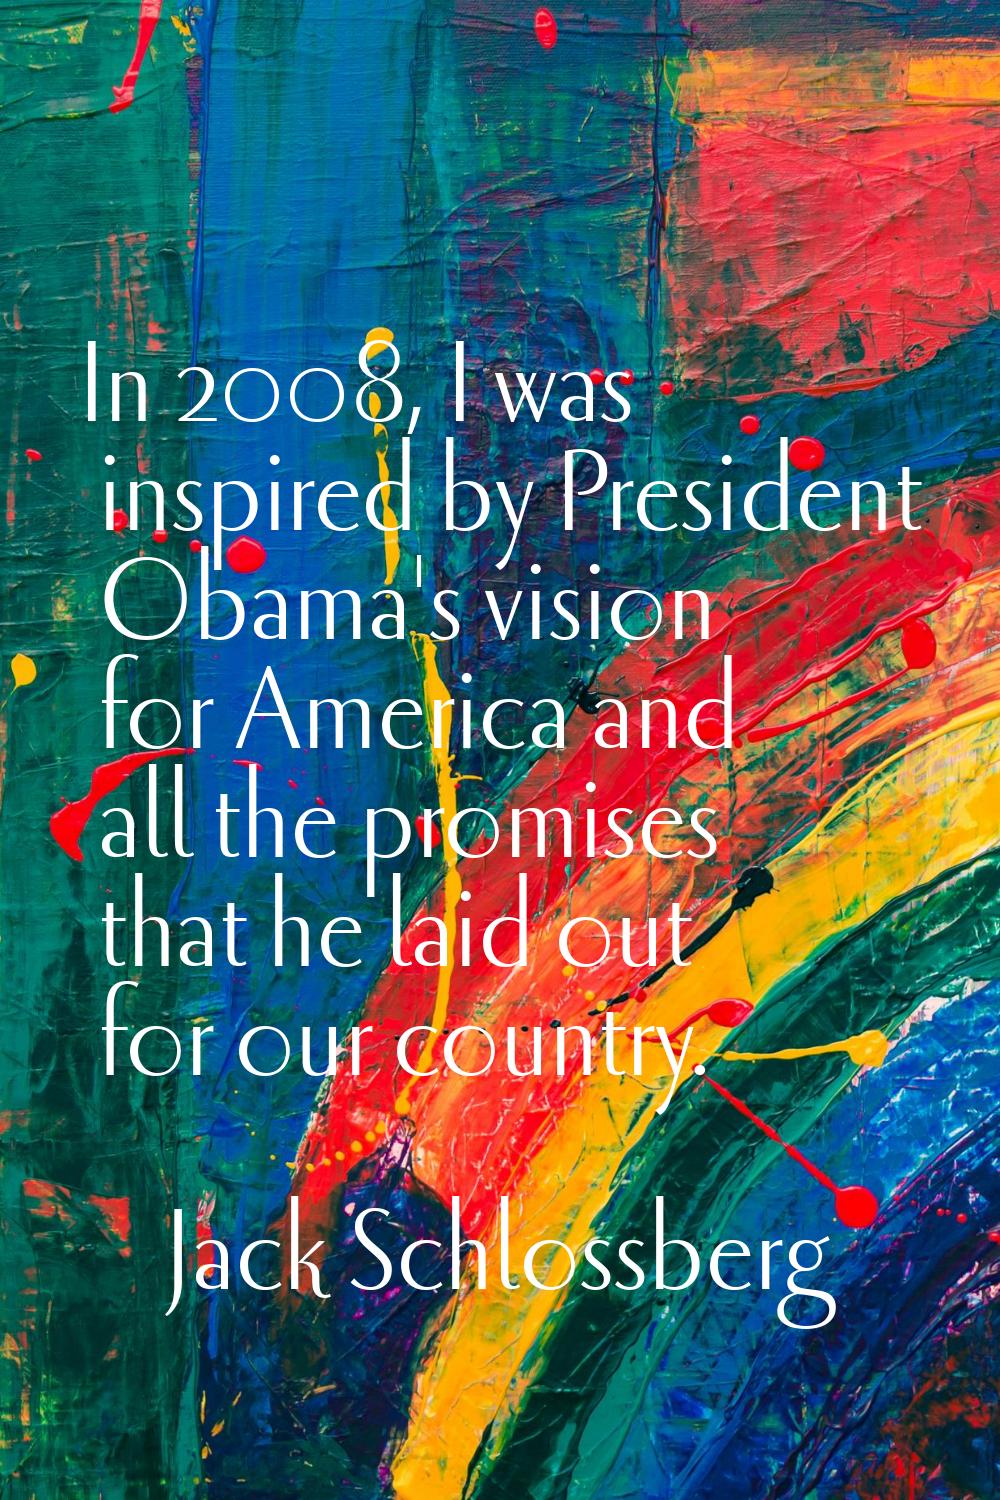 In 2008, I was inspired by President Obama's vision for America and all the promises that he laid o